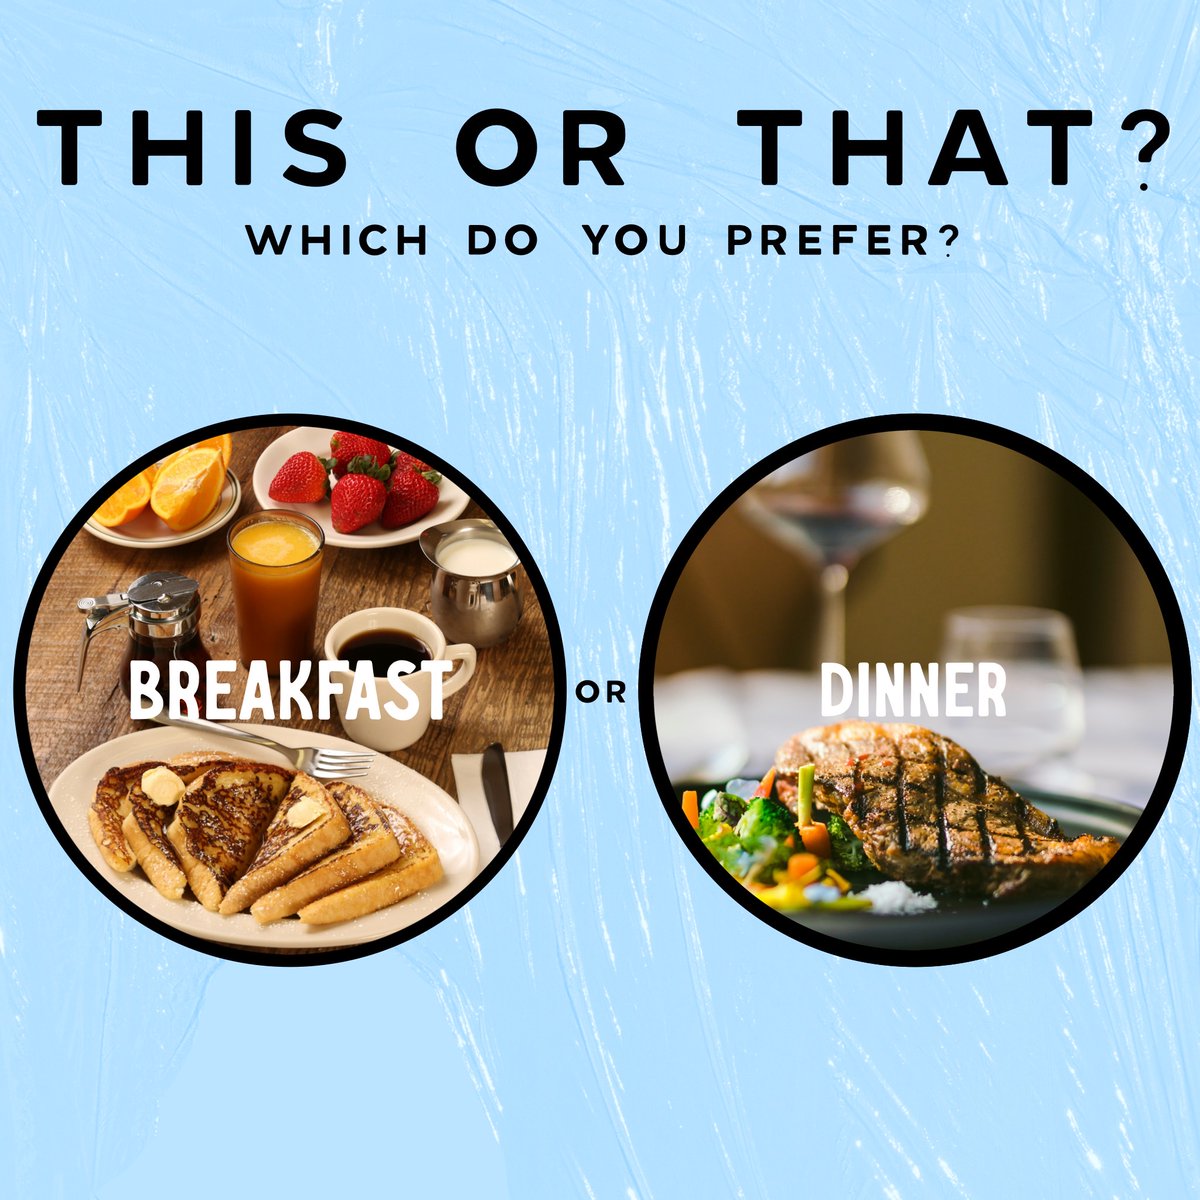 Which do you prefer?  Let us know in the comments! #acop #americanconsumeropinion #surveysformoney #thisorthat #thisorthatquestions #breakfast #dinner